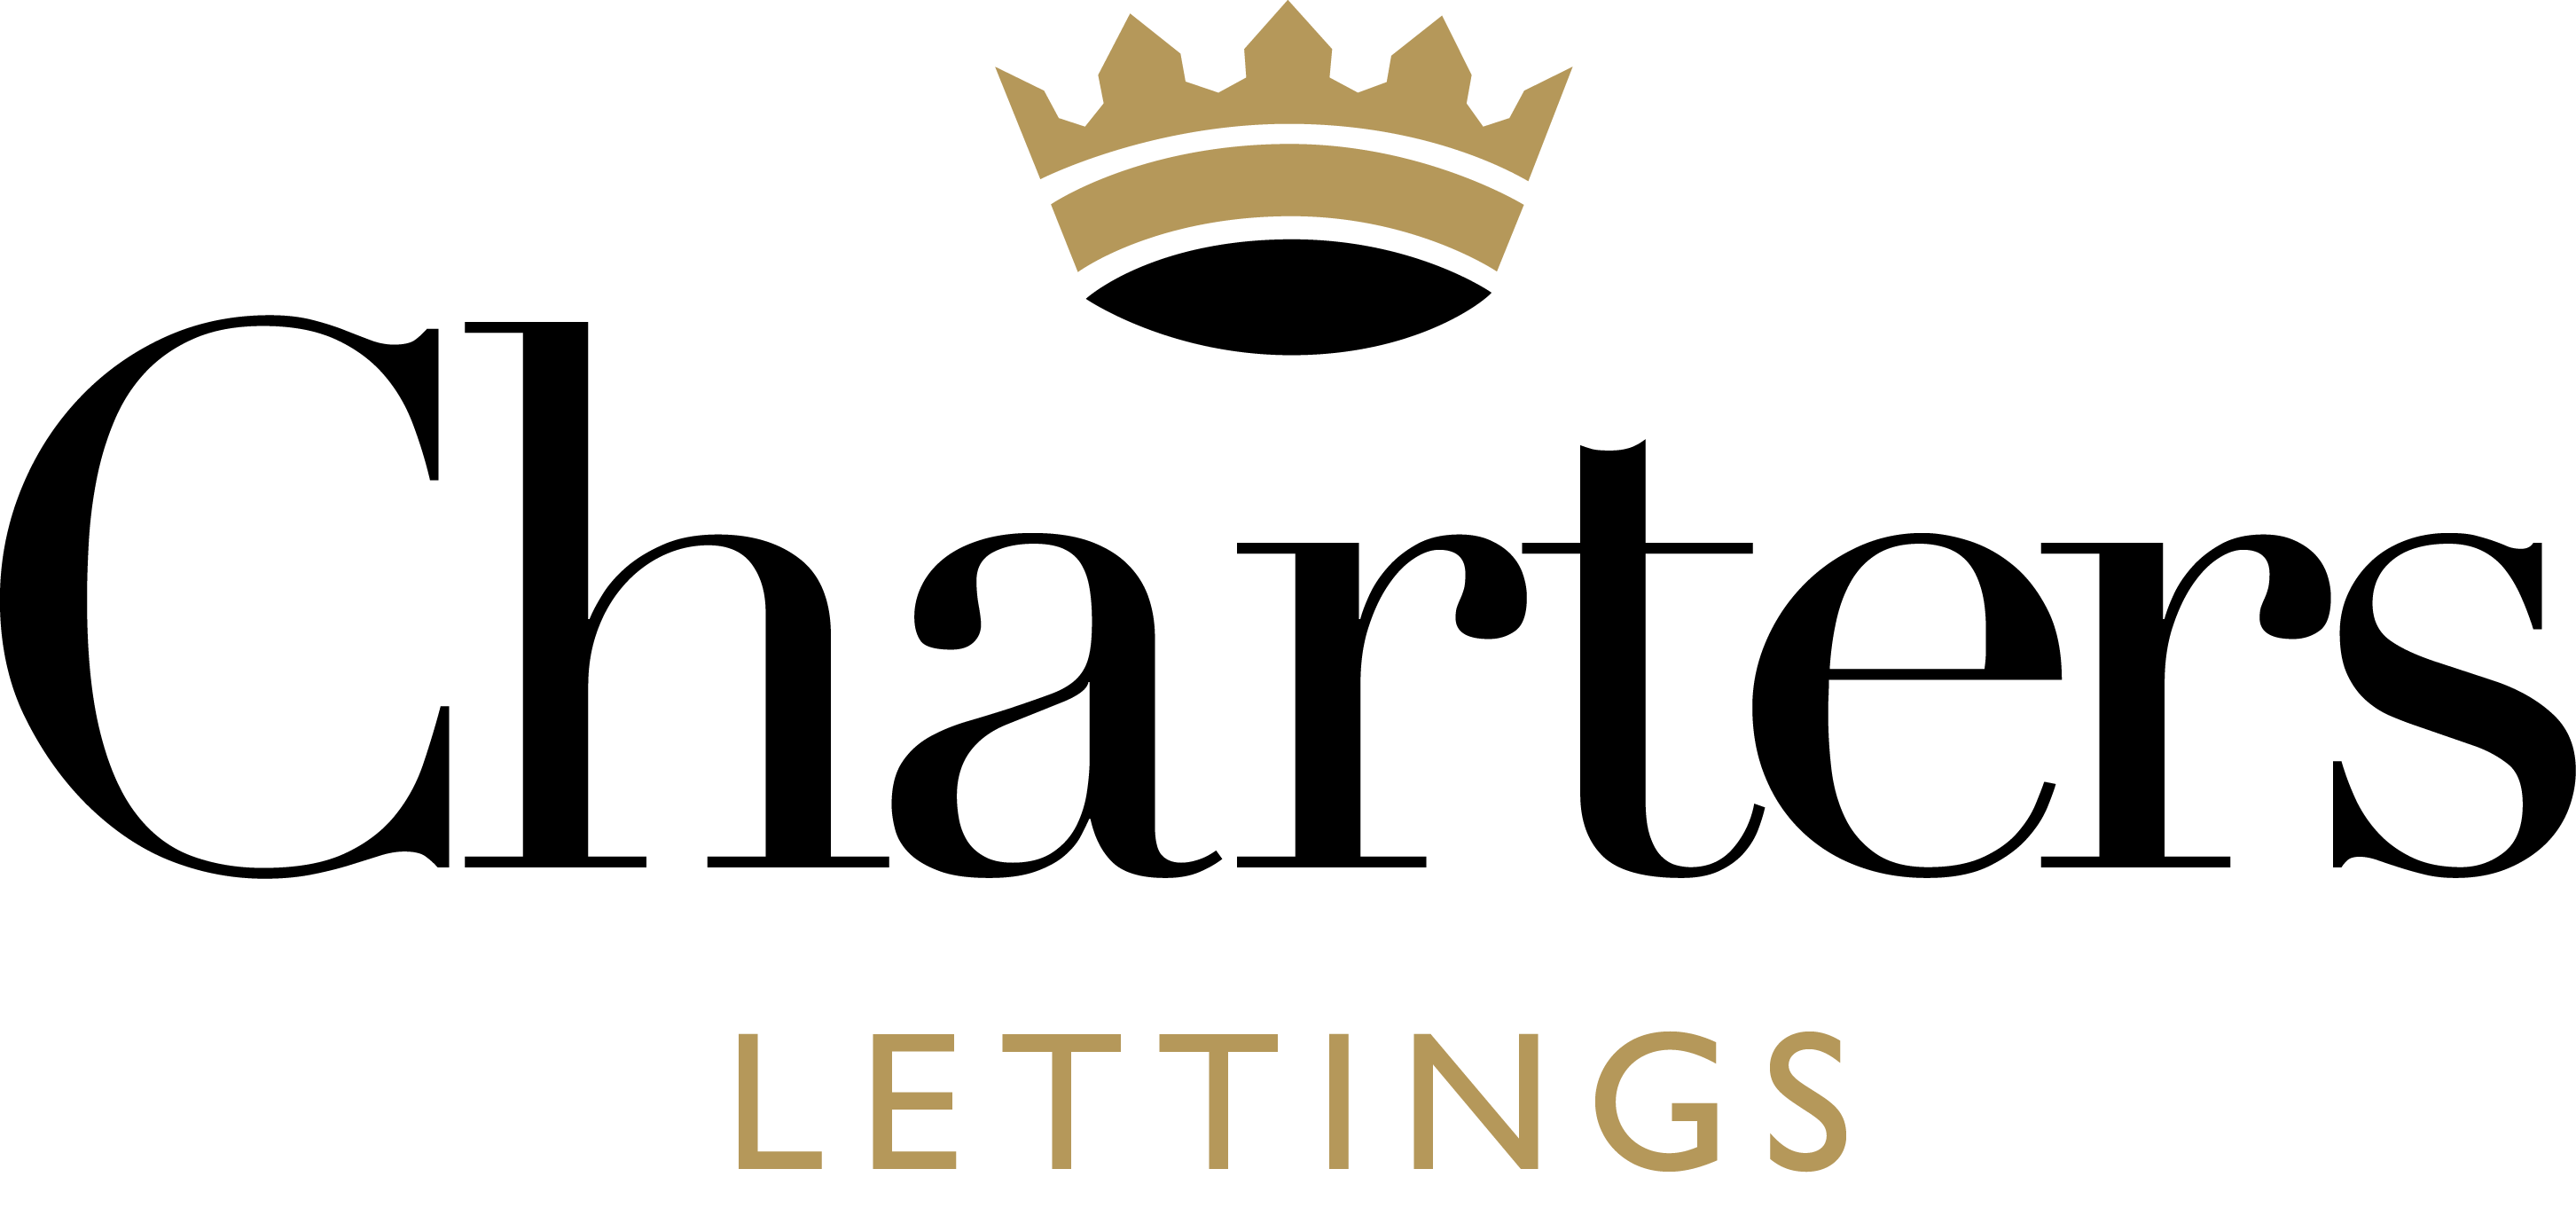 charters_new_lettings_logo_white.png